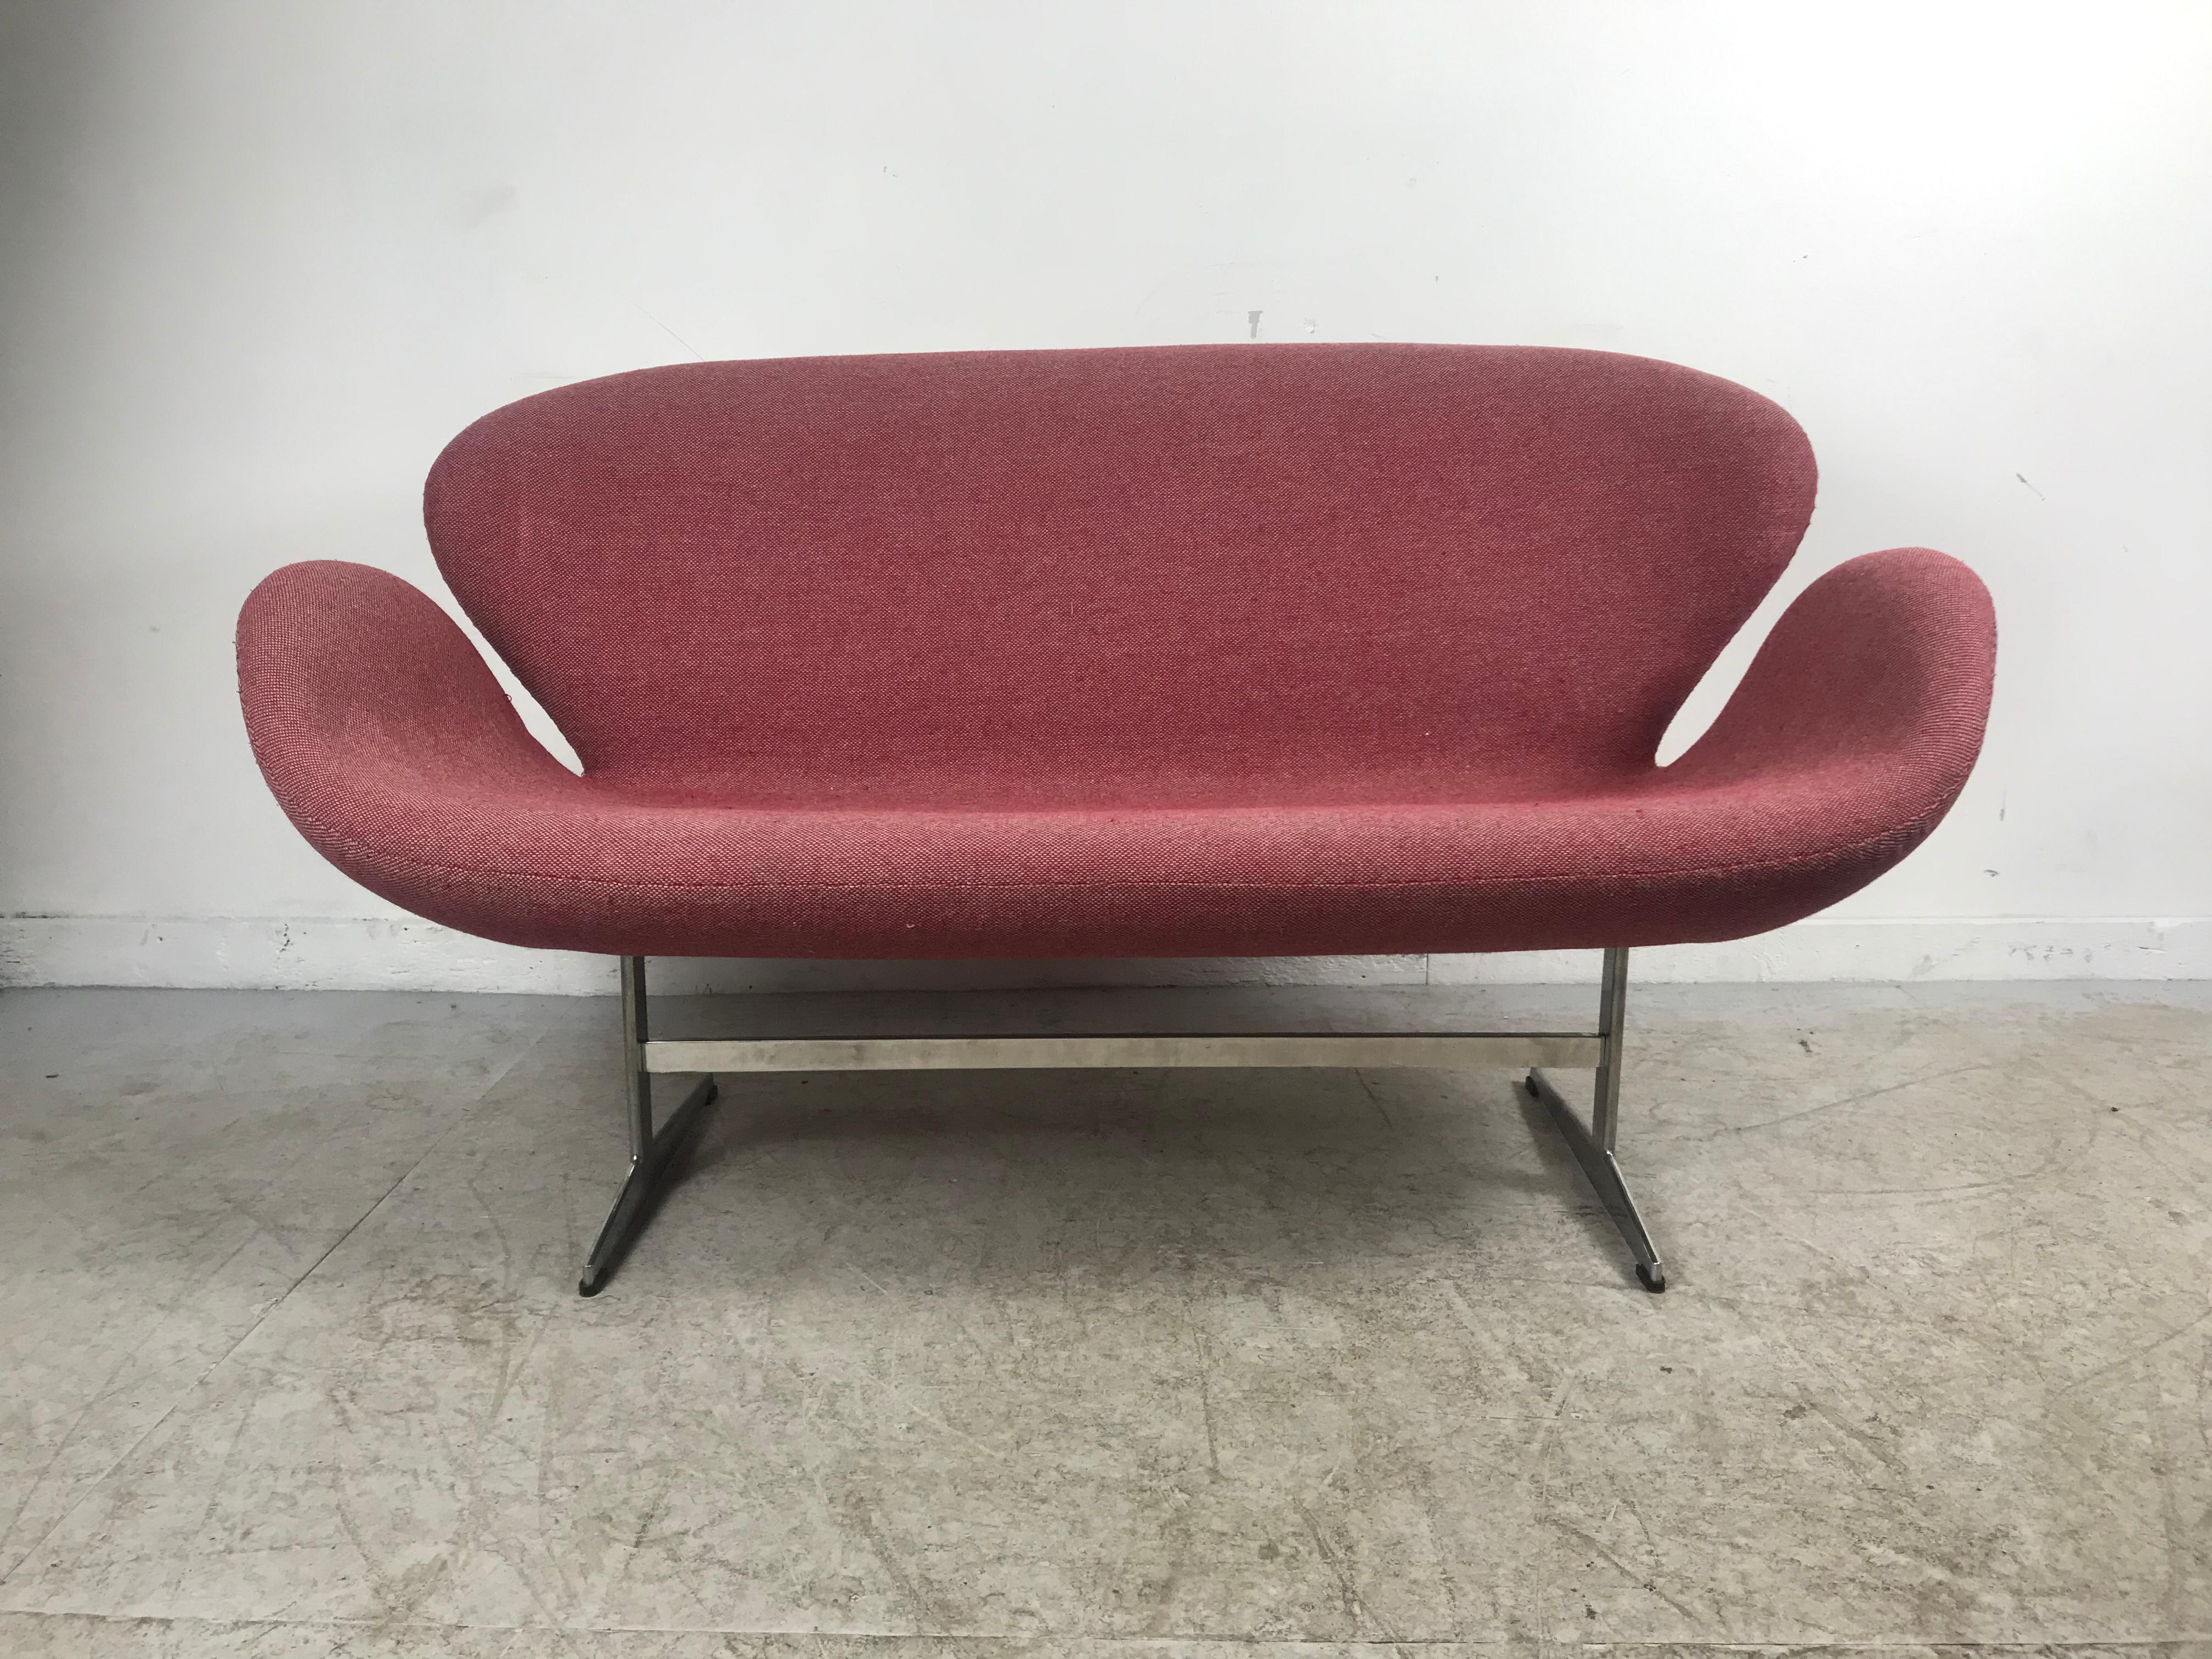 Originally created for the SAS Hotel in Copenhagen, this is Arne Jacoben's sofa version of the famous Swan chair. Designed as a companion piece to the swan and egg chair. It's an elegant form that is light in scale as well as a comfortable seat.